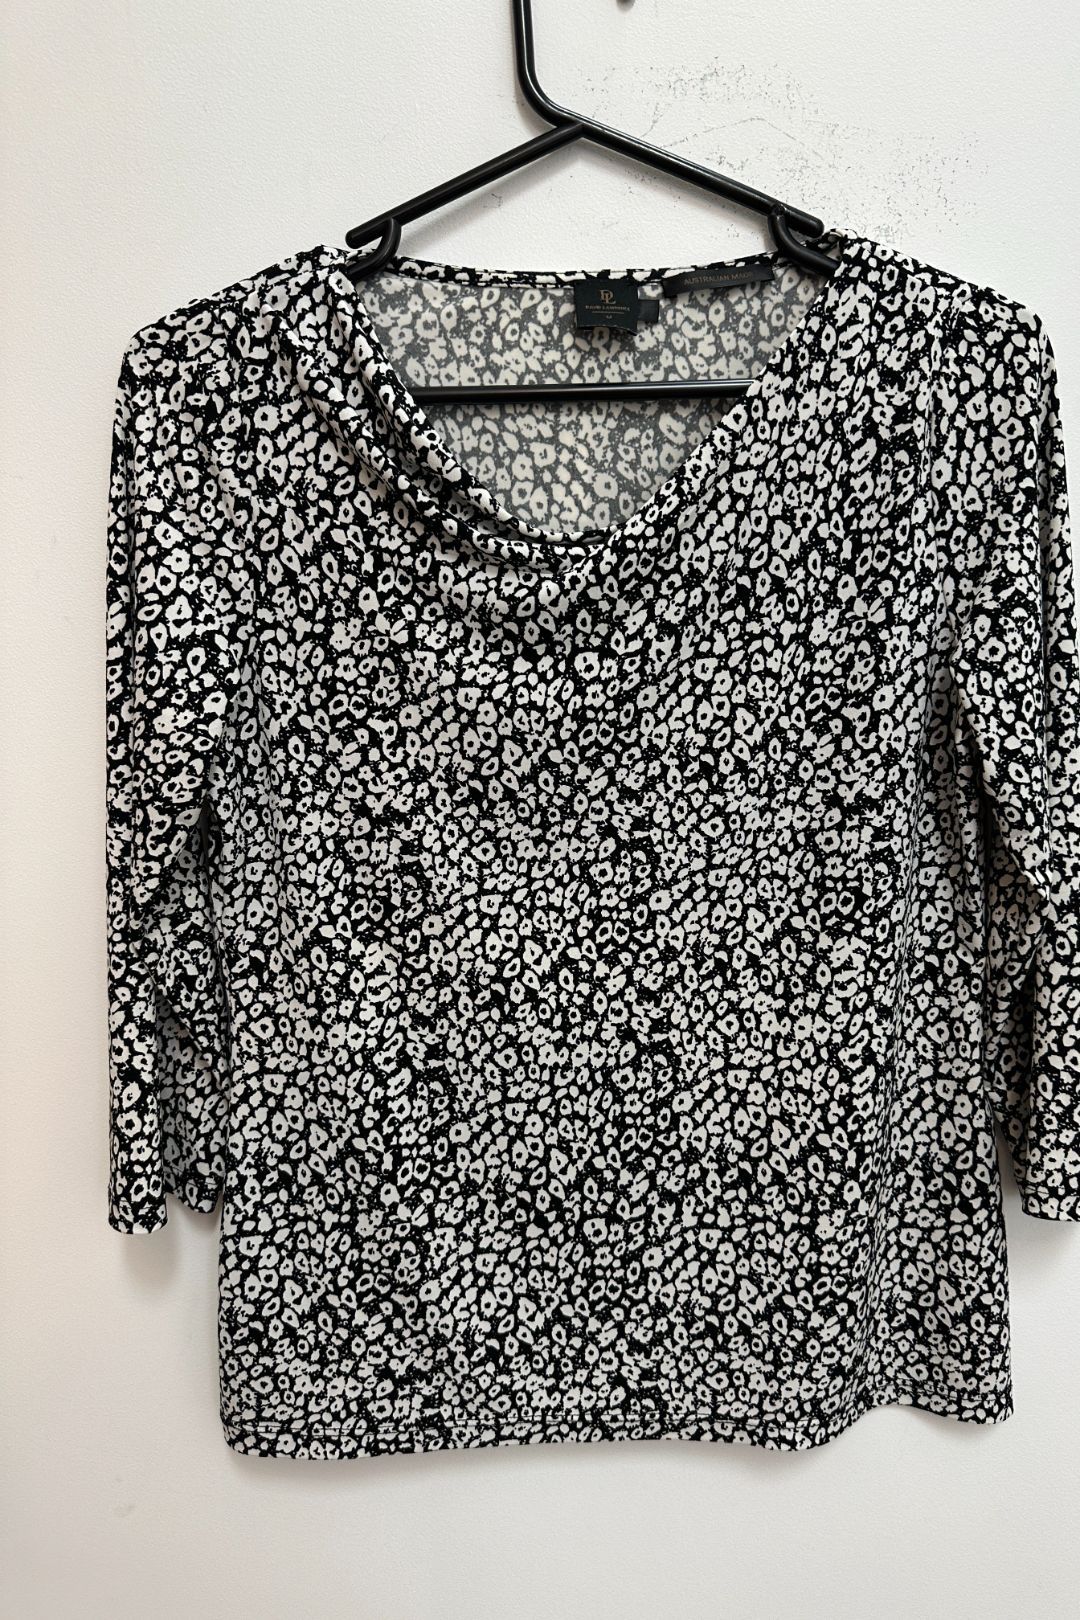 David Lawrence - Black And White Print Jersey Top